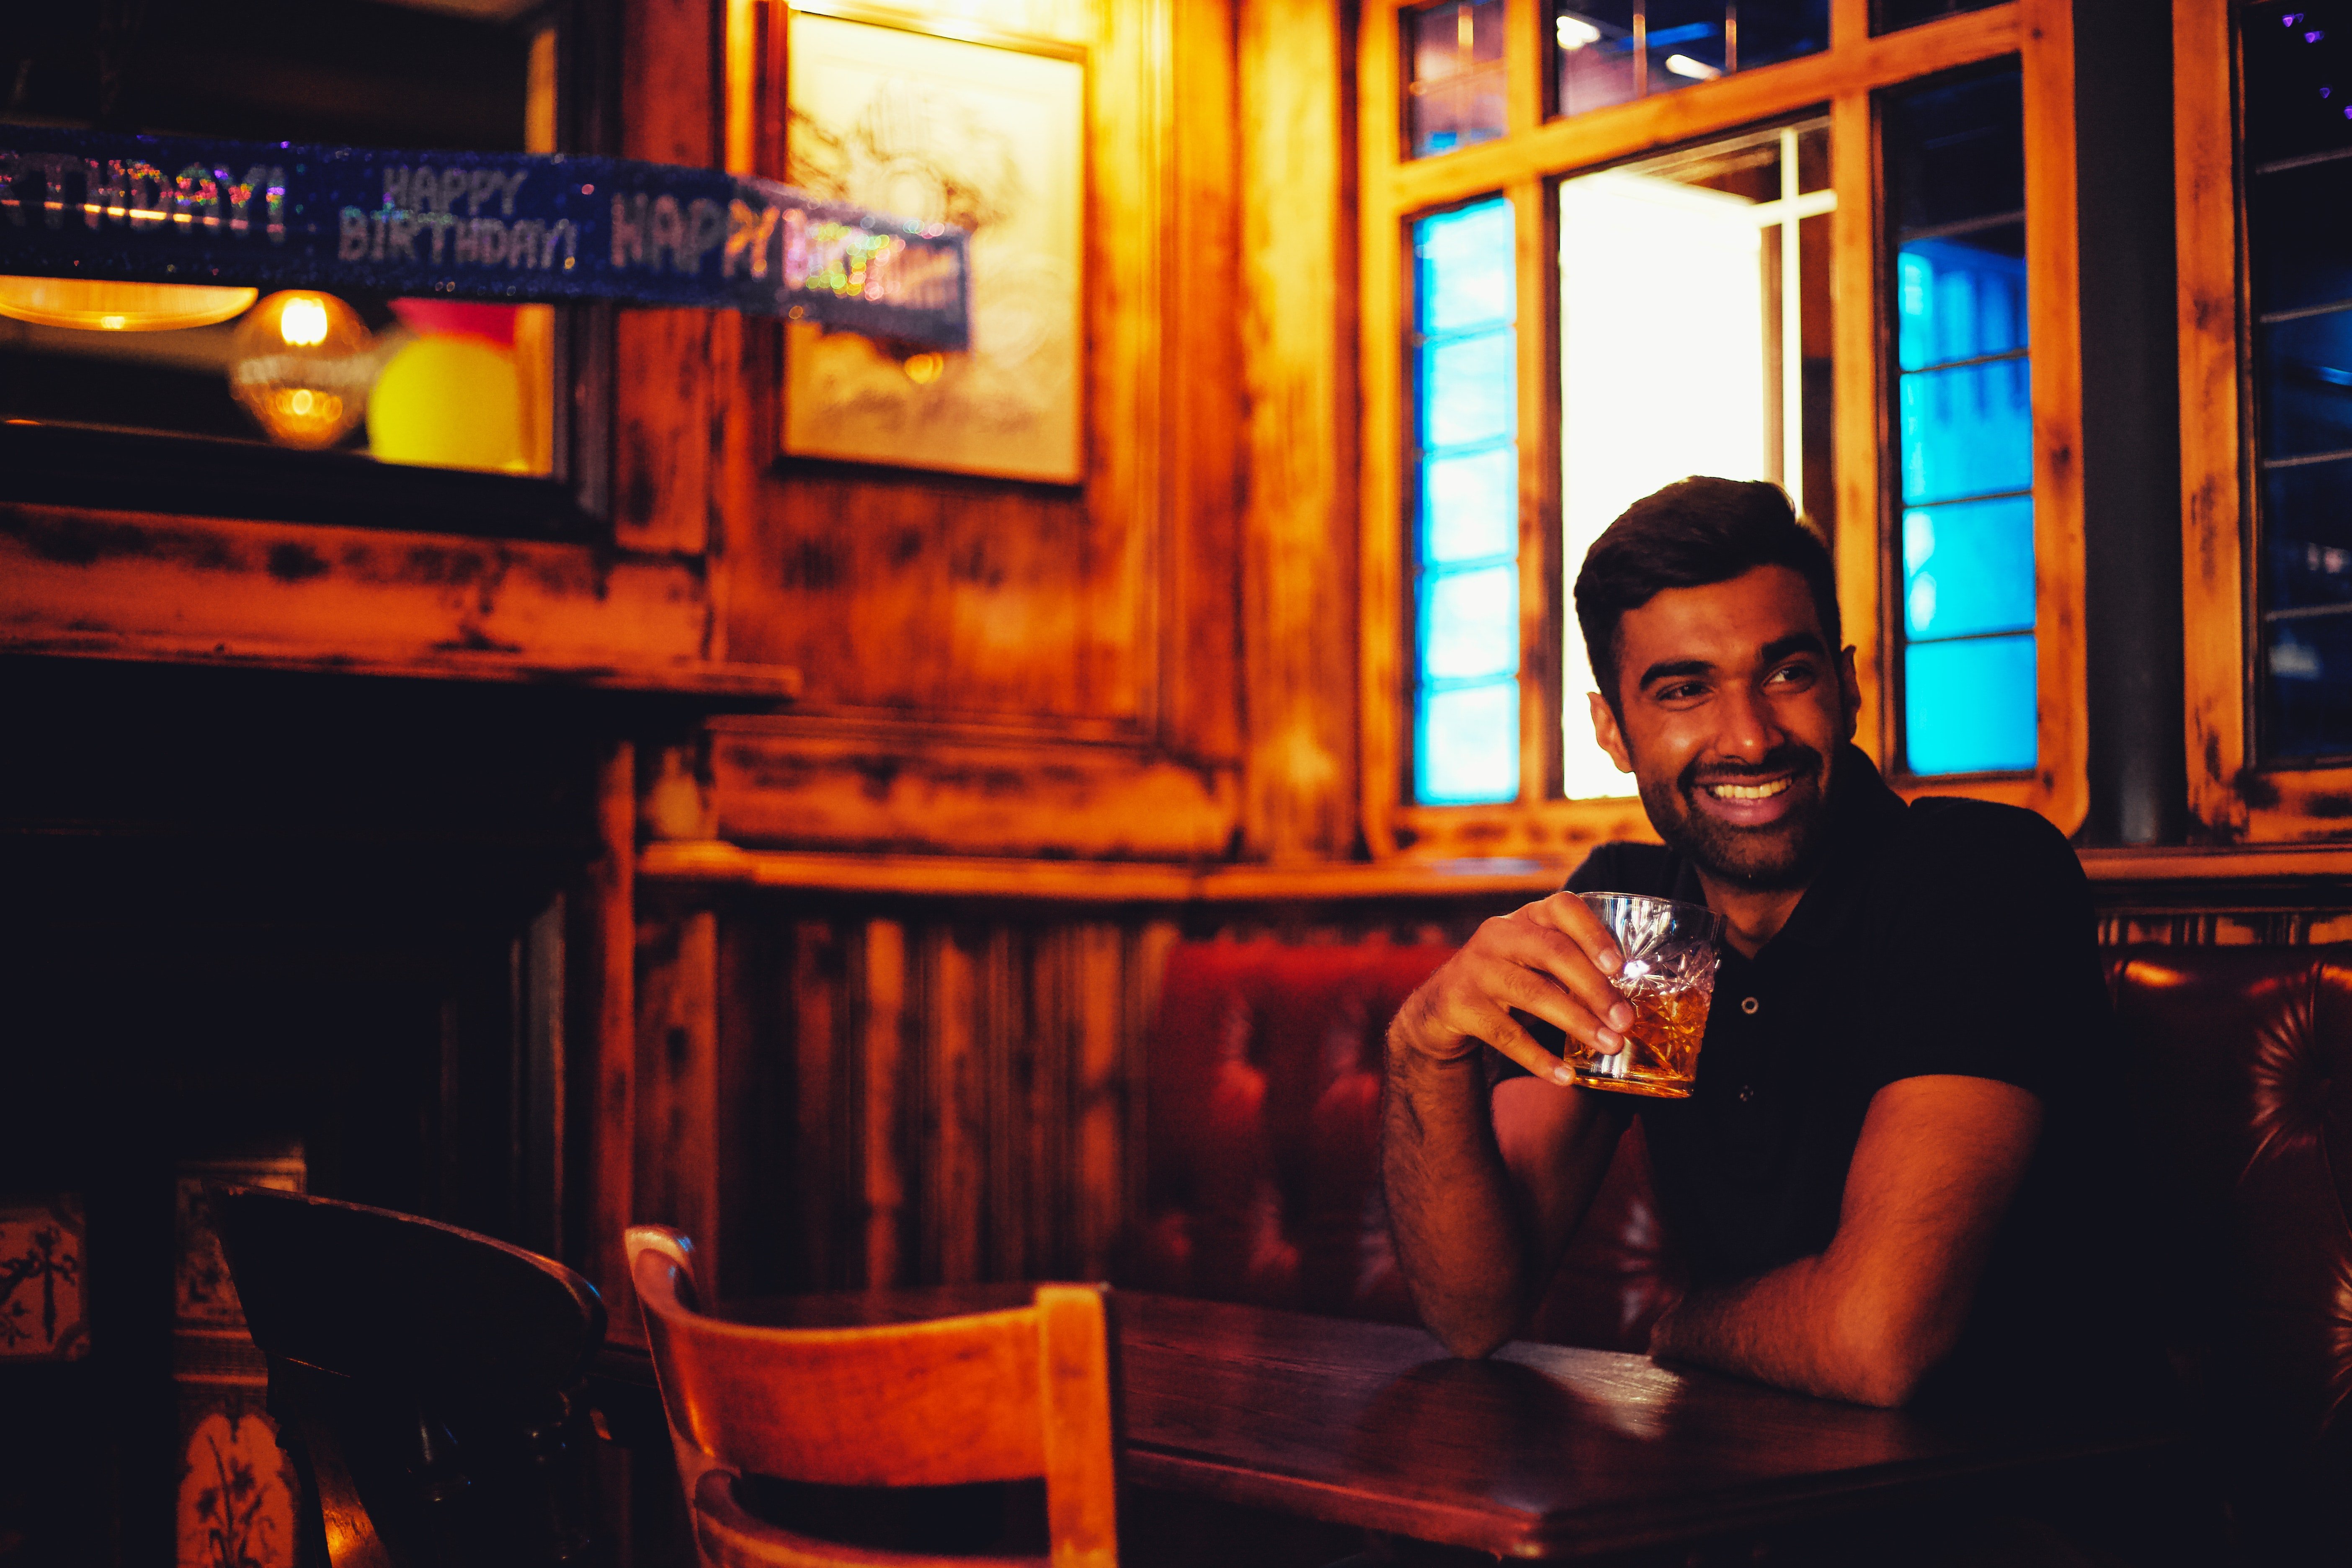 Man smiles while drinking alcohol. | Source: Pexels